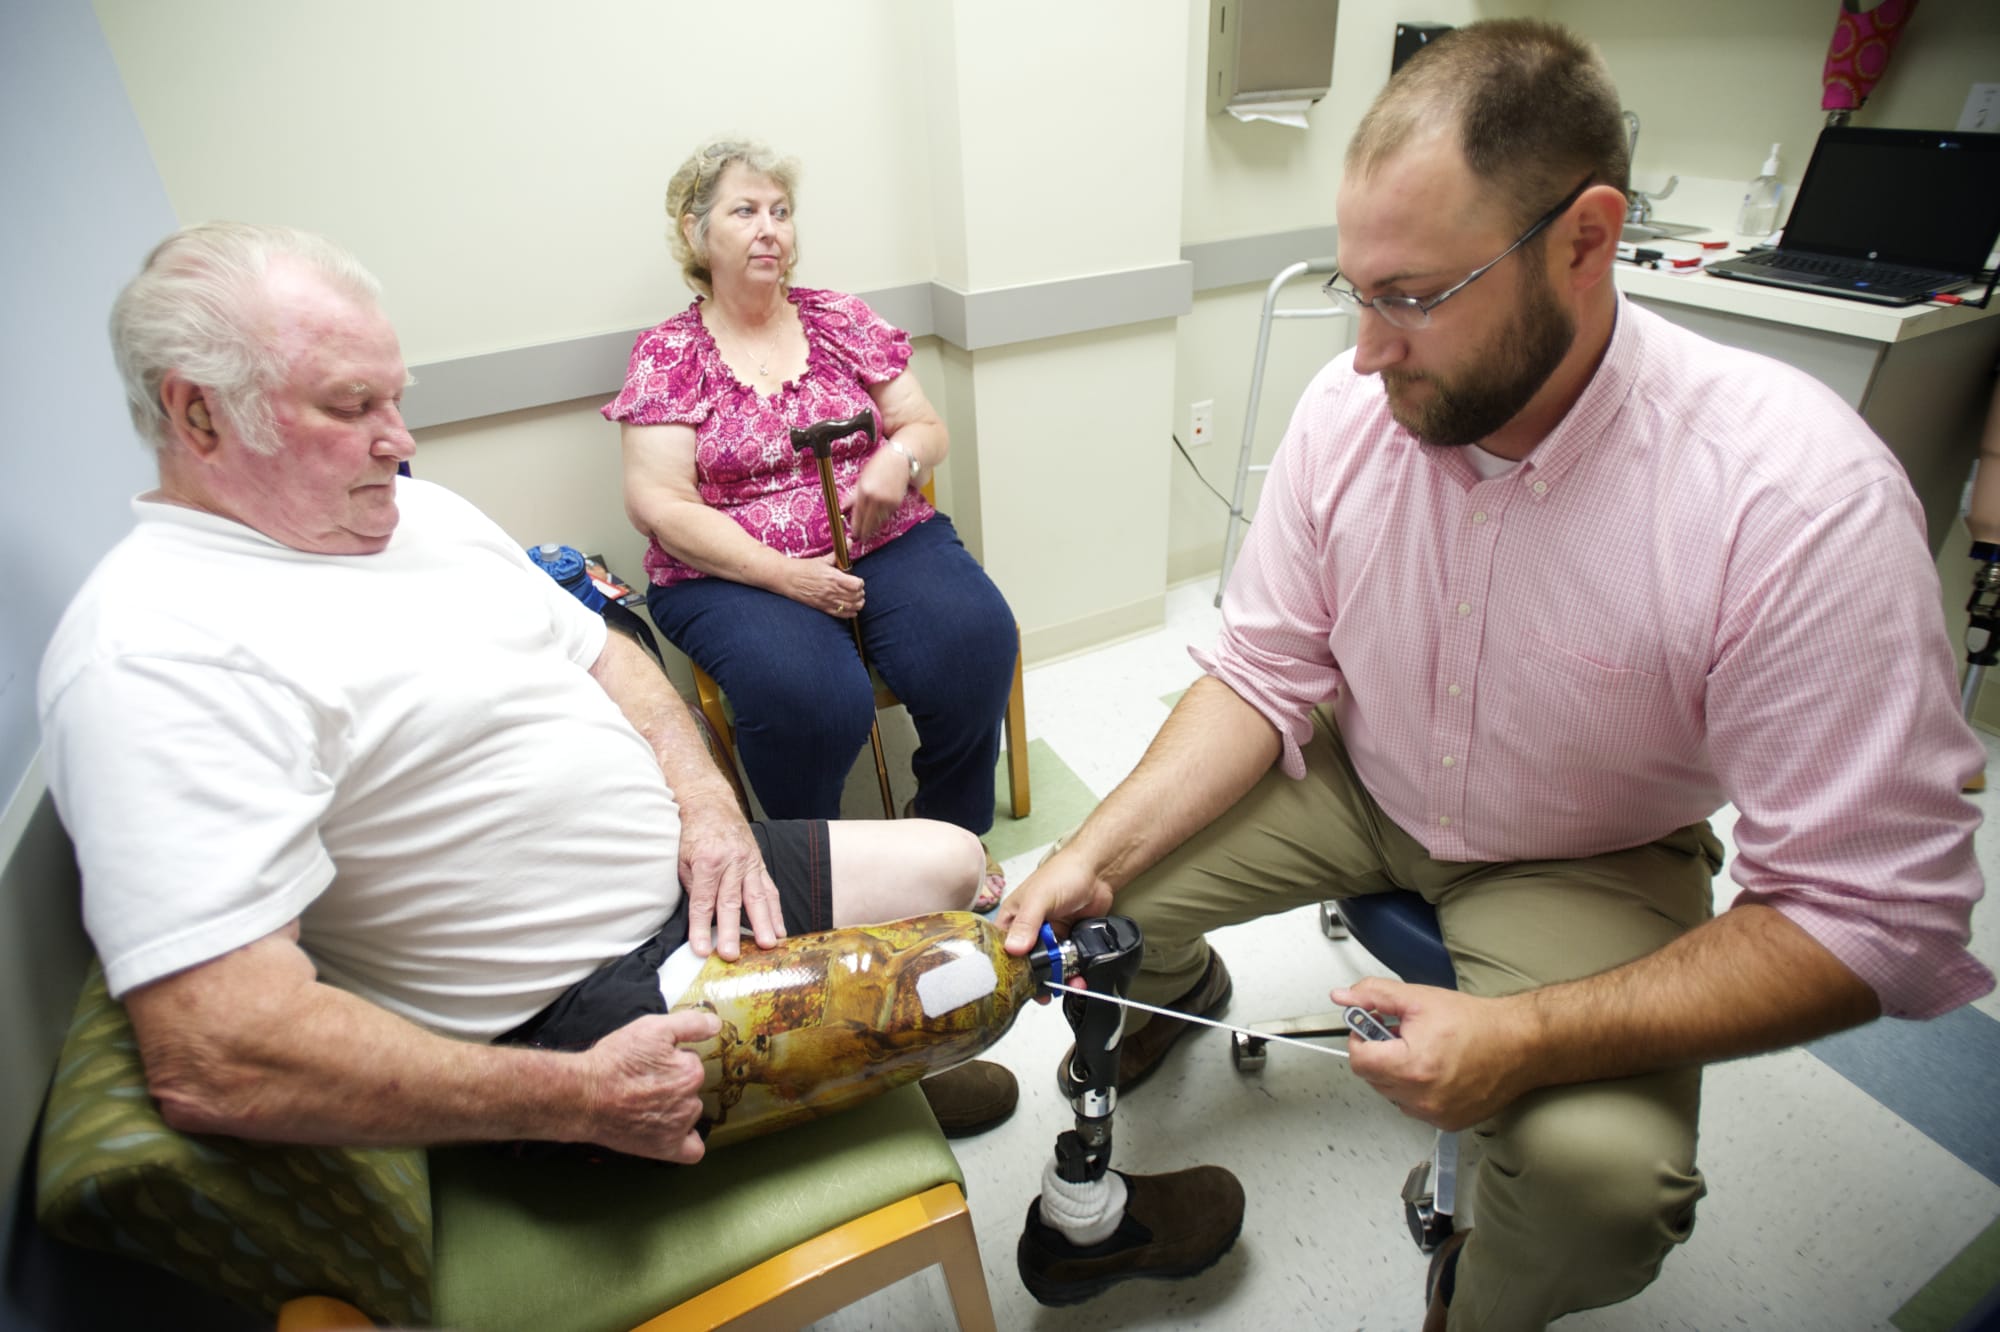 Working in Clark County: Mark Sauser, prosthetist and orthotist